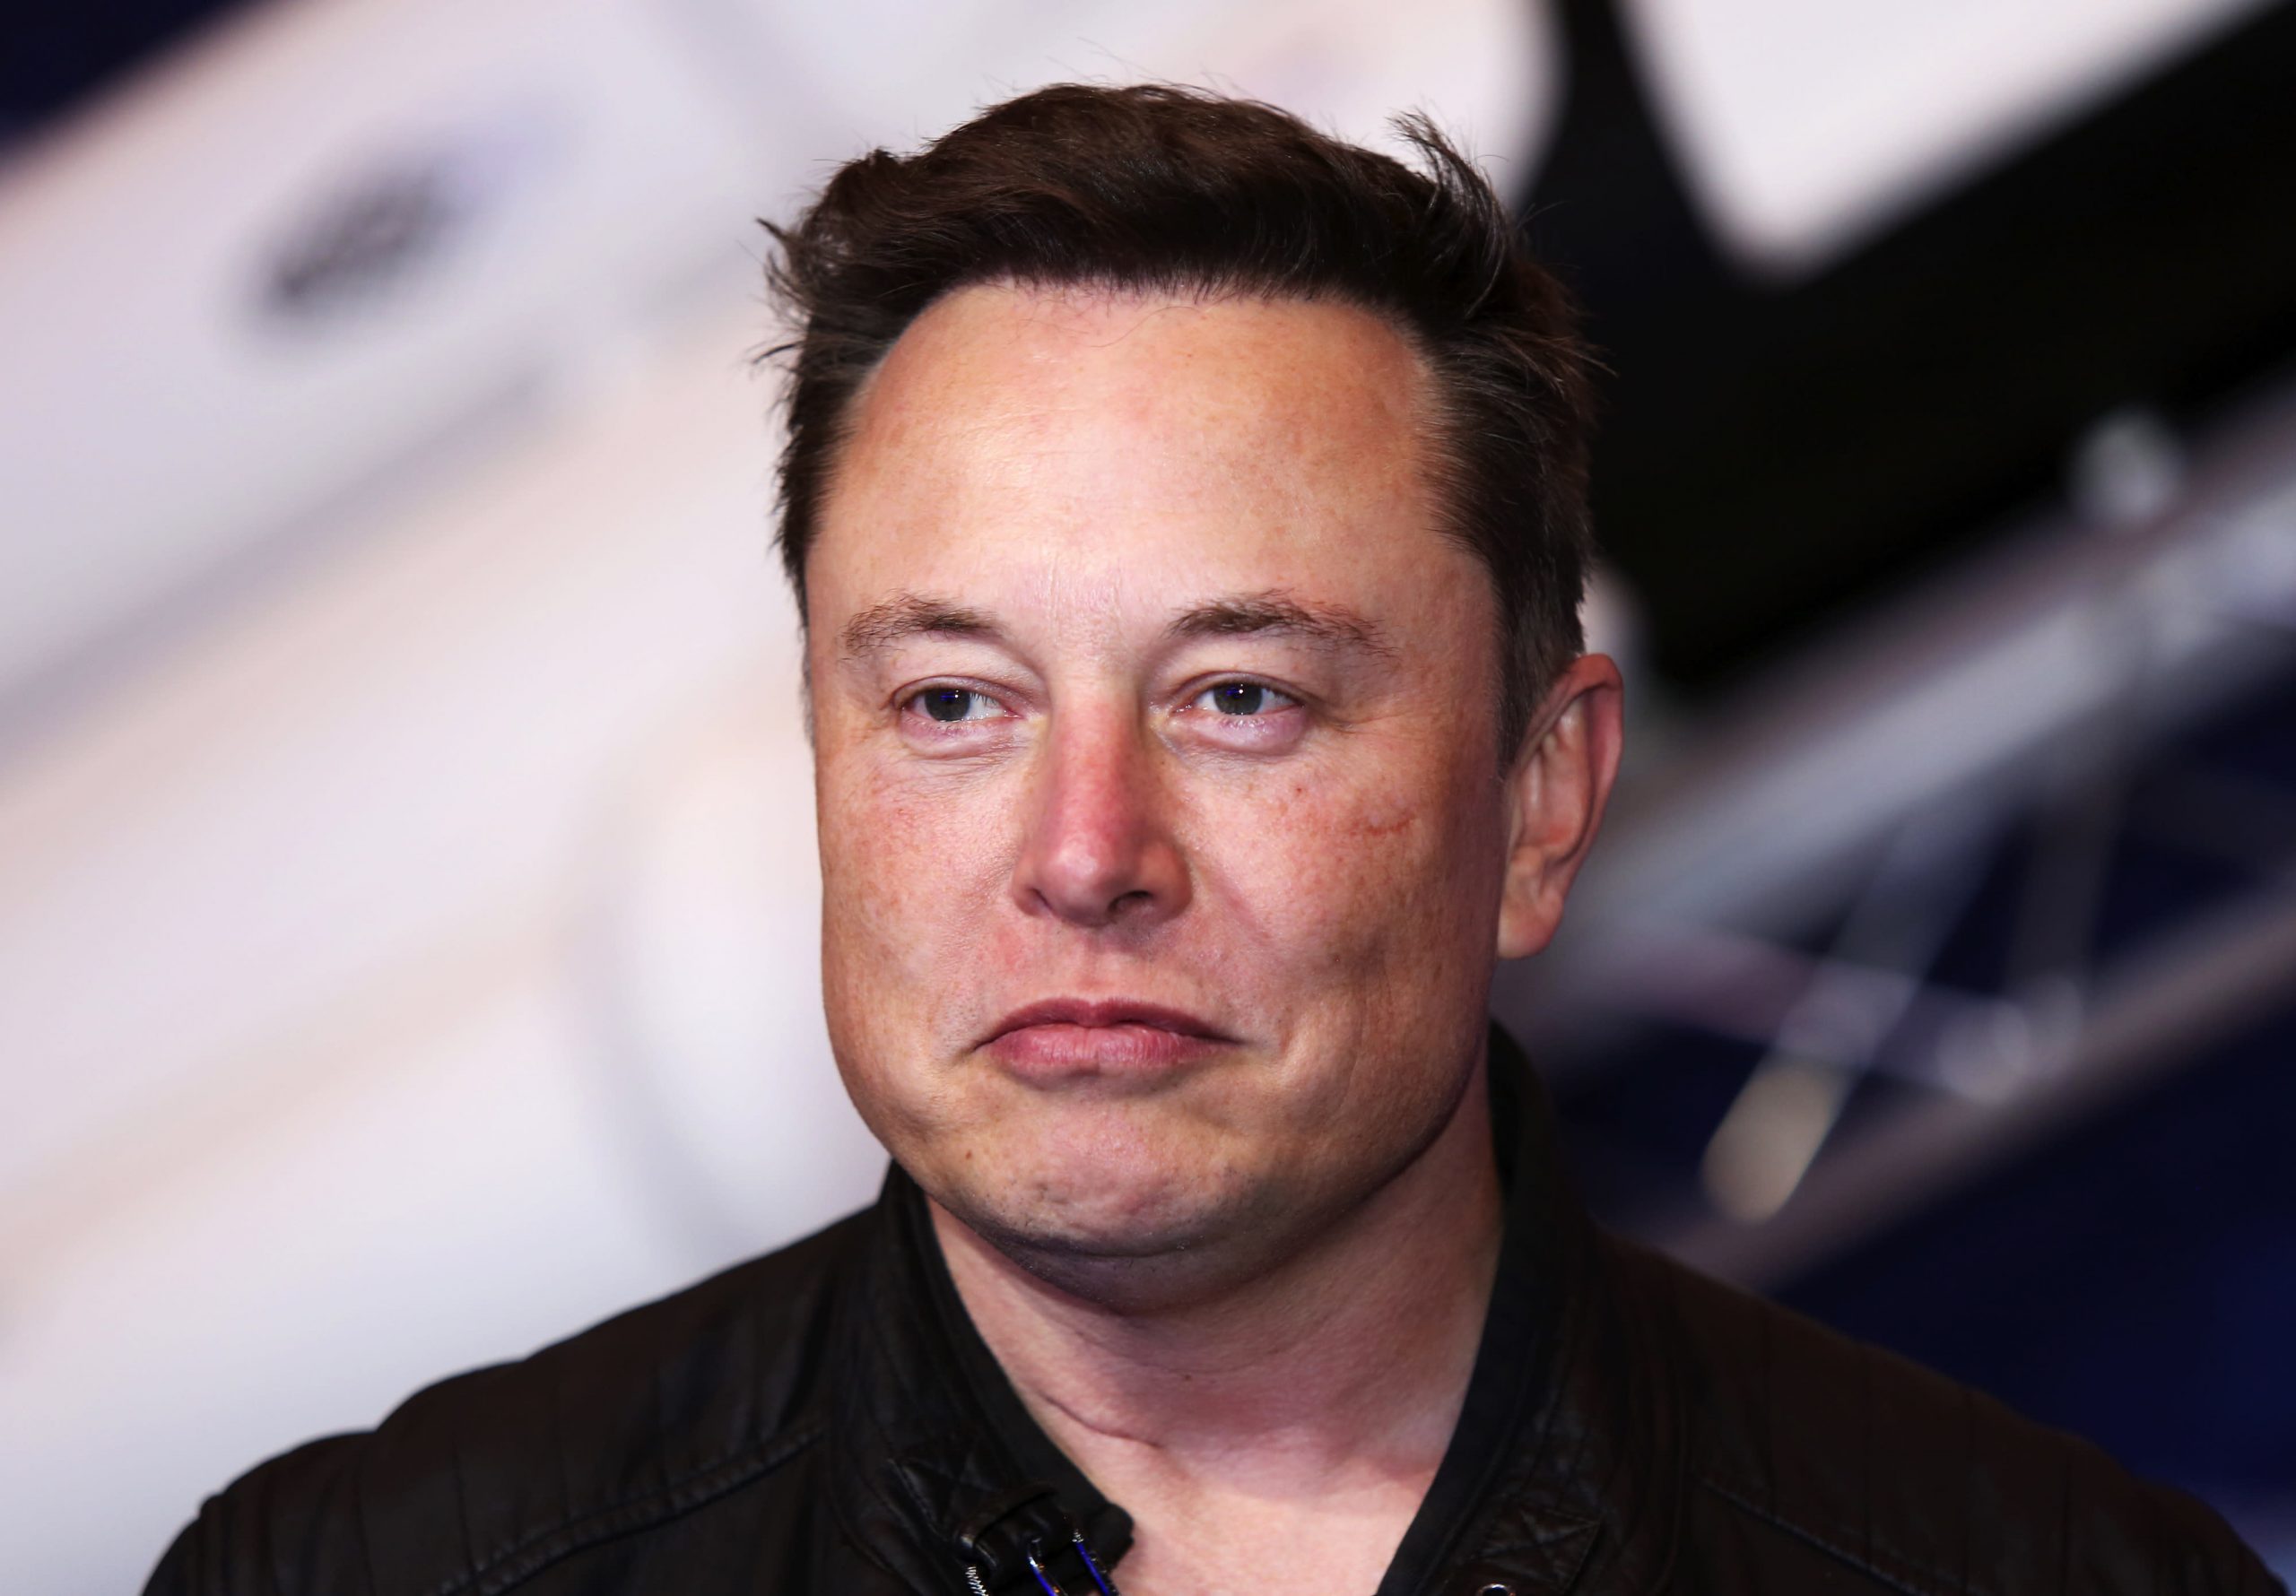 Elon Musk should apologize for making fun of gender equals, says HRC